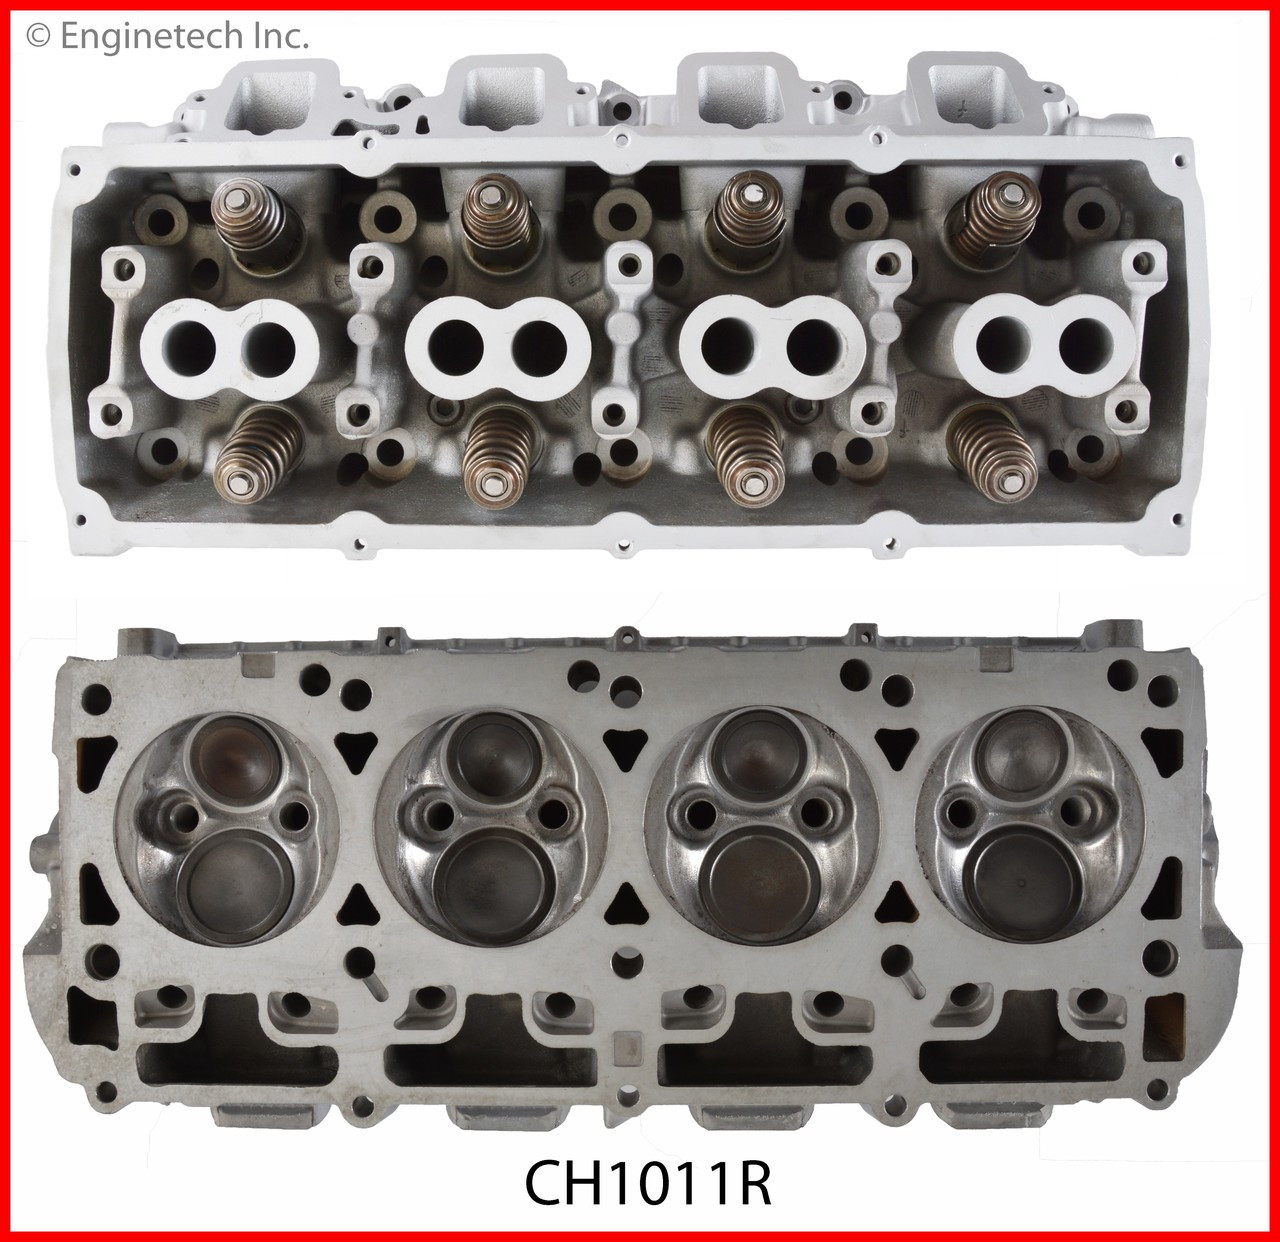 Cylinder Head Assembly - 2005 Dodge Ram 1500 5.7L (CH1011R.A9)